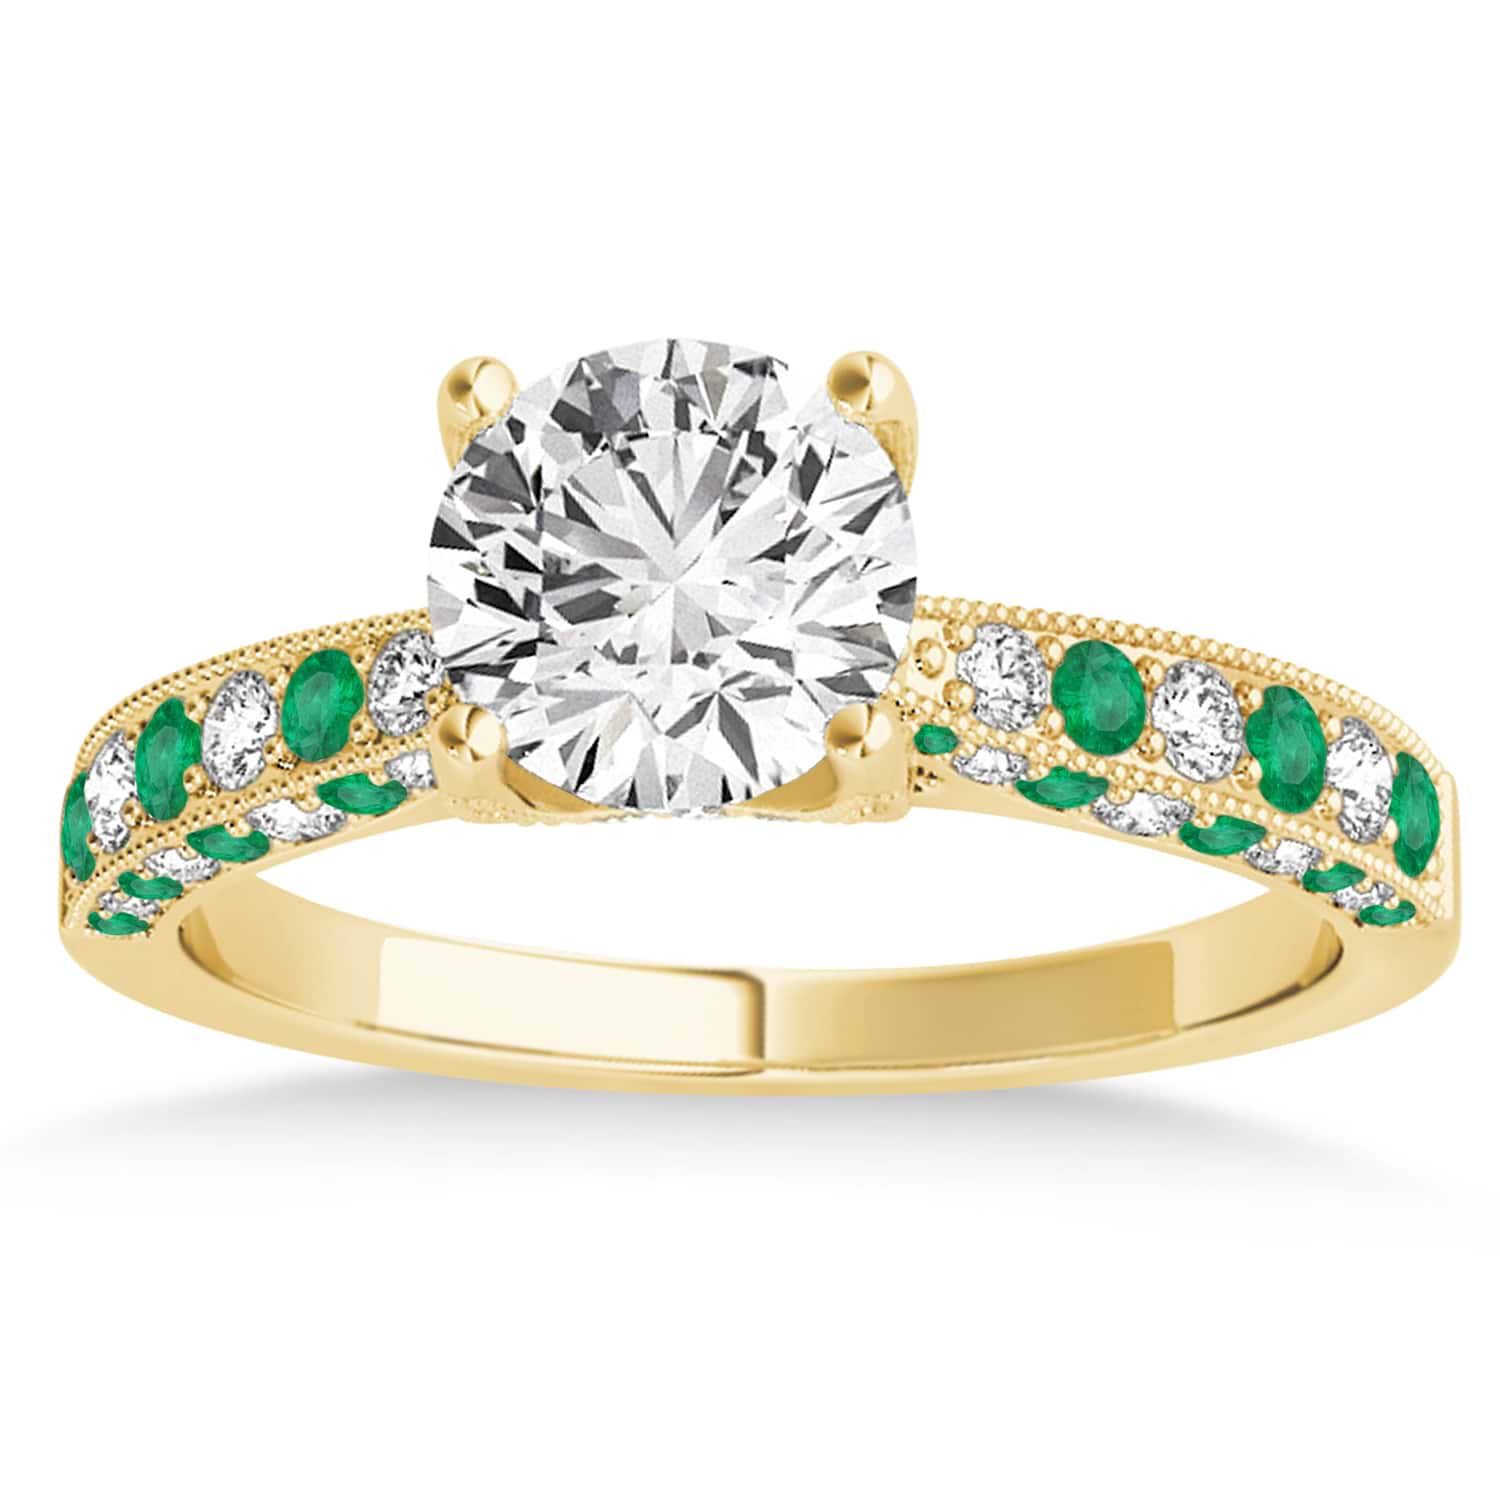 Alternating Diamond & Emerald Engravable Engagement Ring in 18k Yellow Gold (0.45ct)